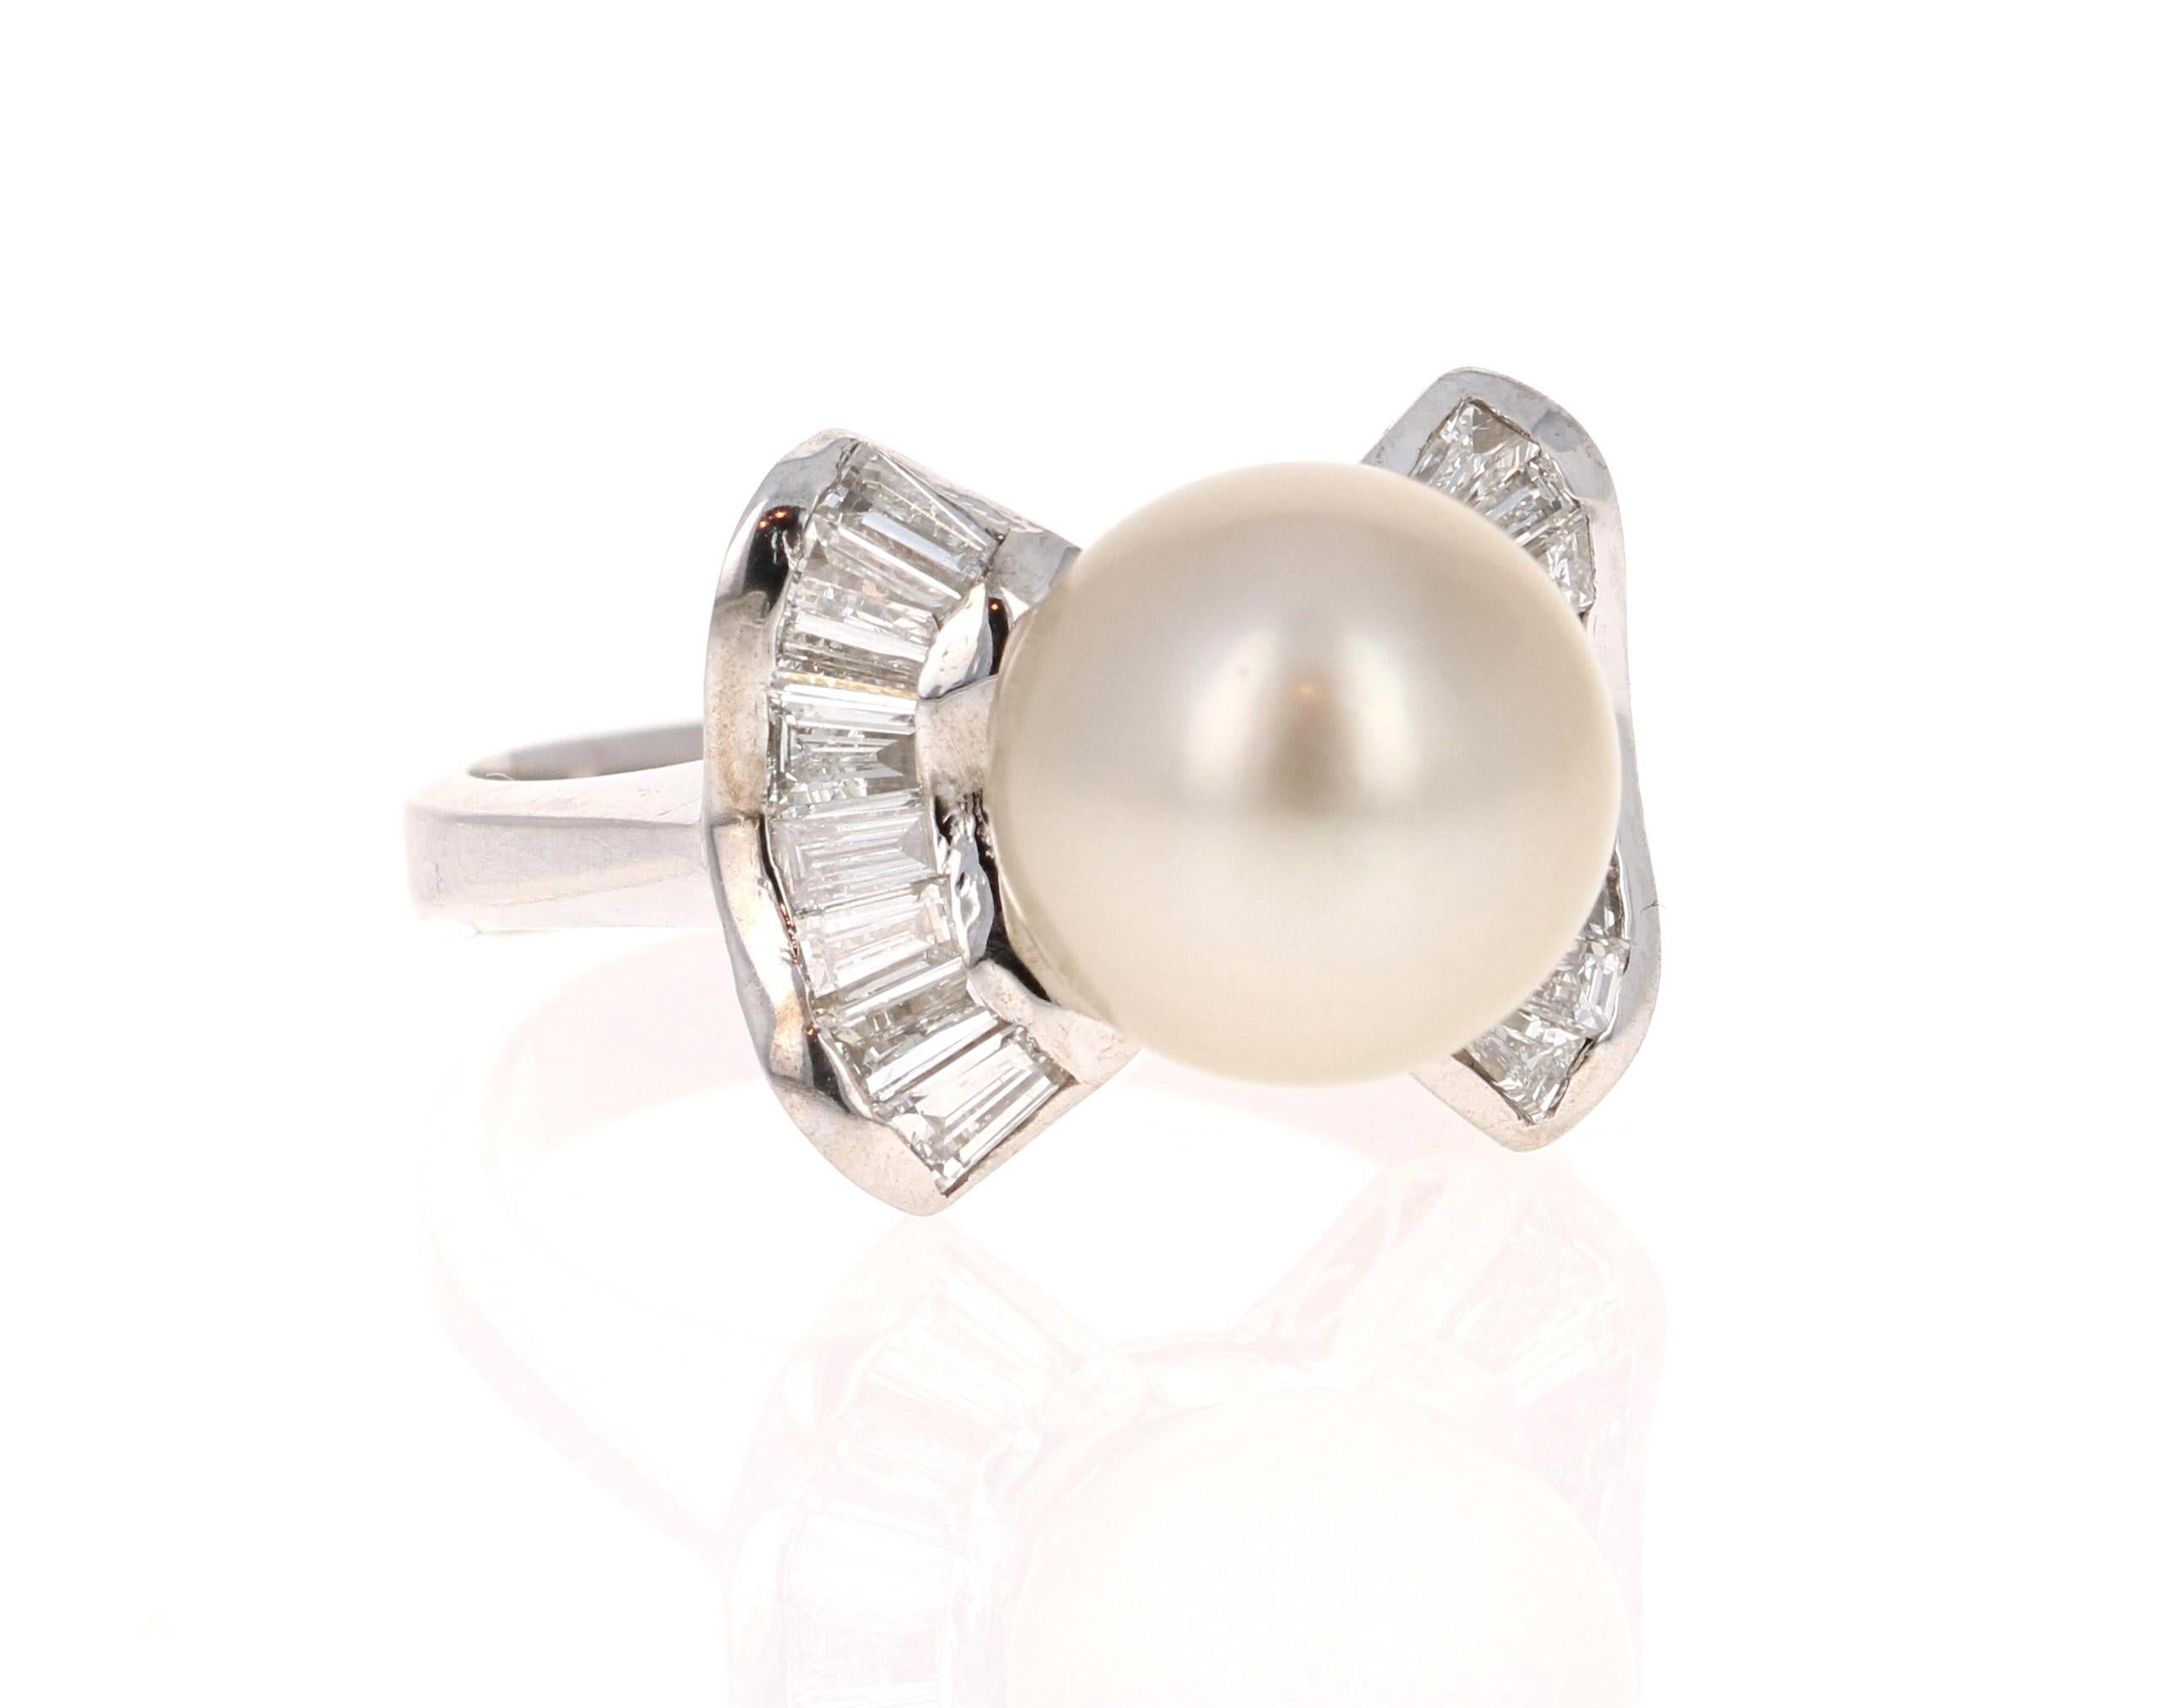 This beautiful ring has a stunning 10 mm South Sea Pearl that is set in the center of the ring.  The pearl is surrounded by a cluster of 18 Baguette Cut Diamonds that weigh 0.75 carats (Clarity: VS and Color: F) 
The ring is made in 14K White Gold